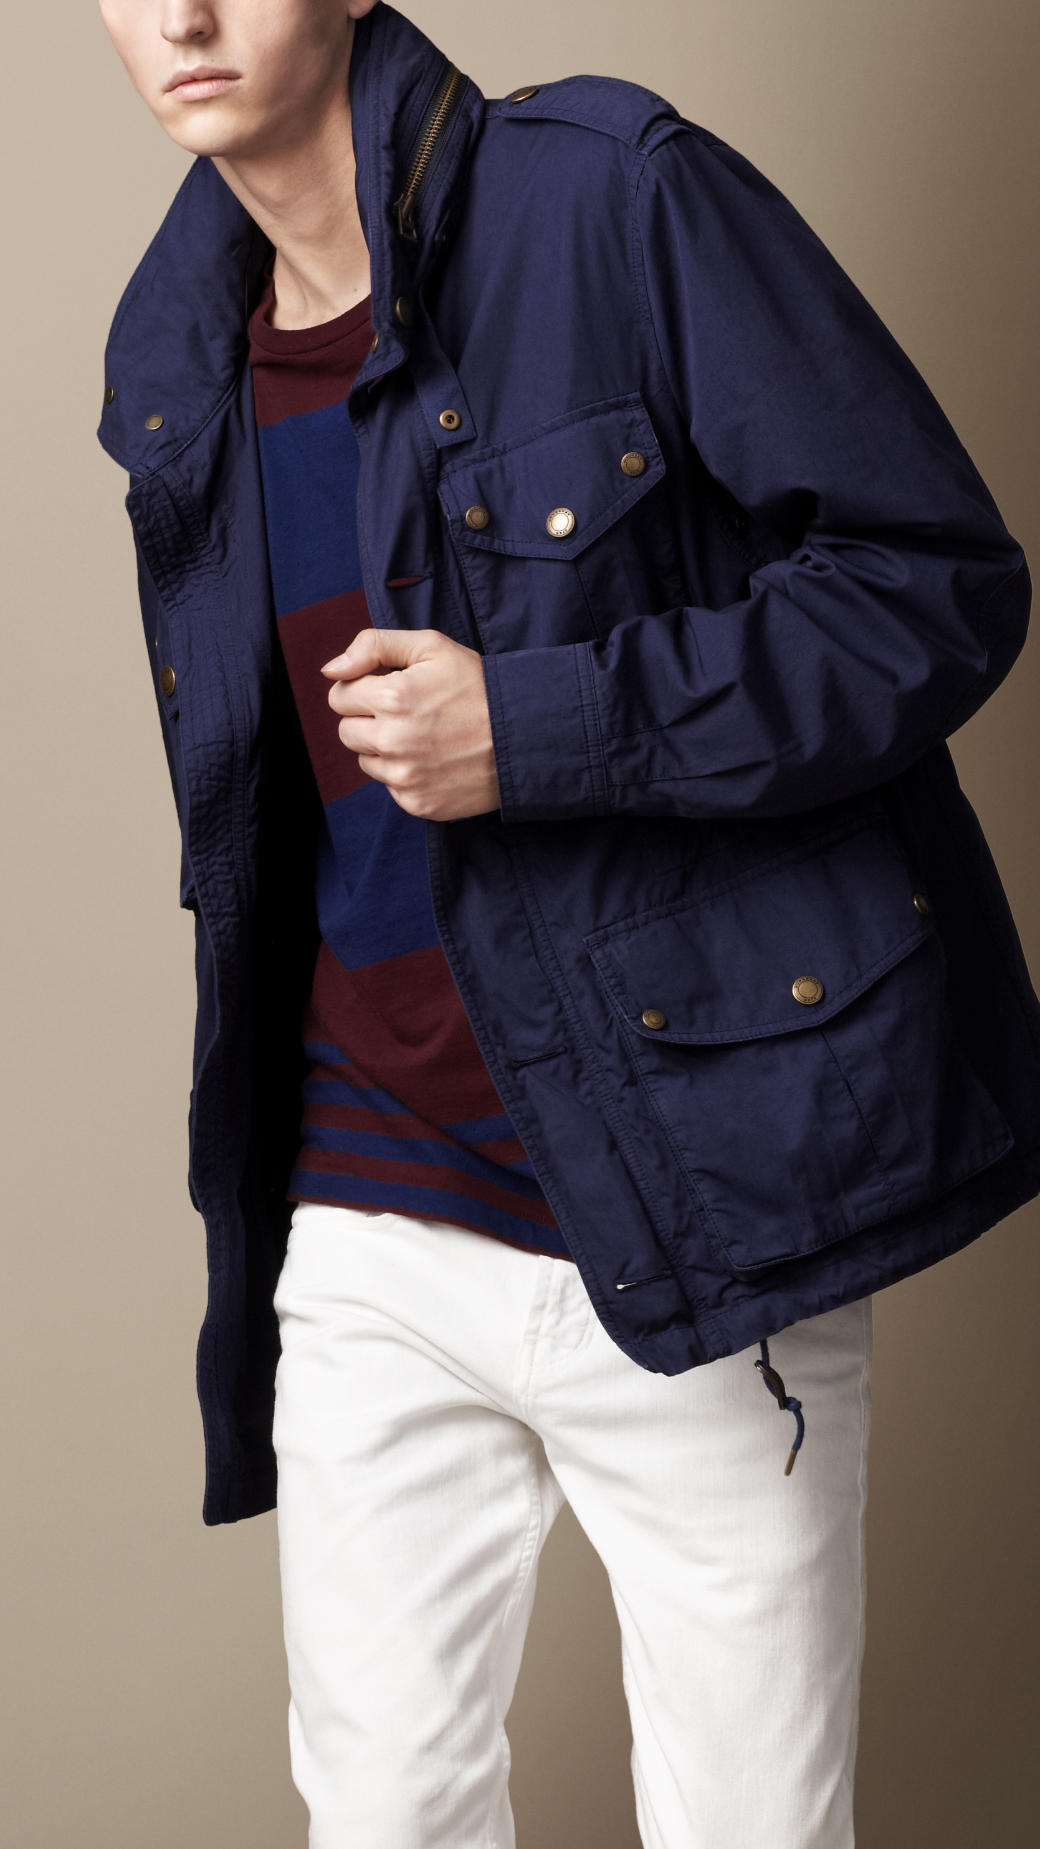 Lyst - Burberry Brit Heritage Cotton Field Jacket in Blue for Men